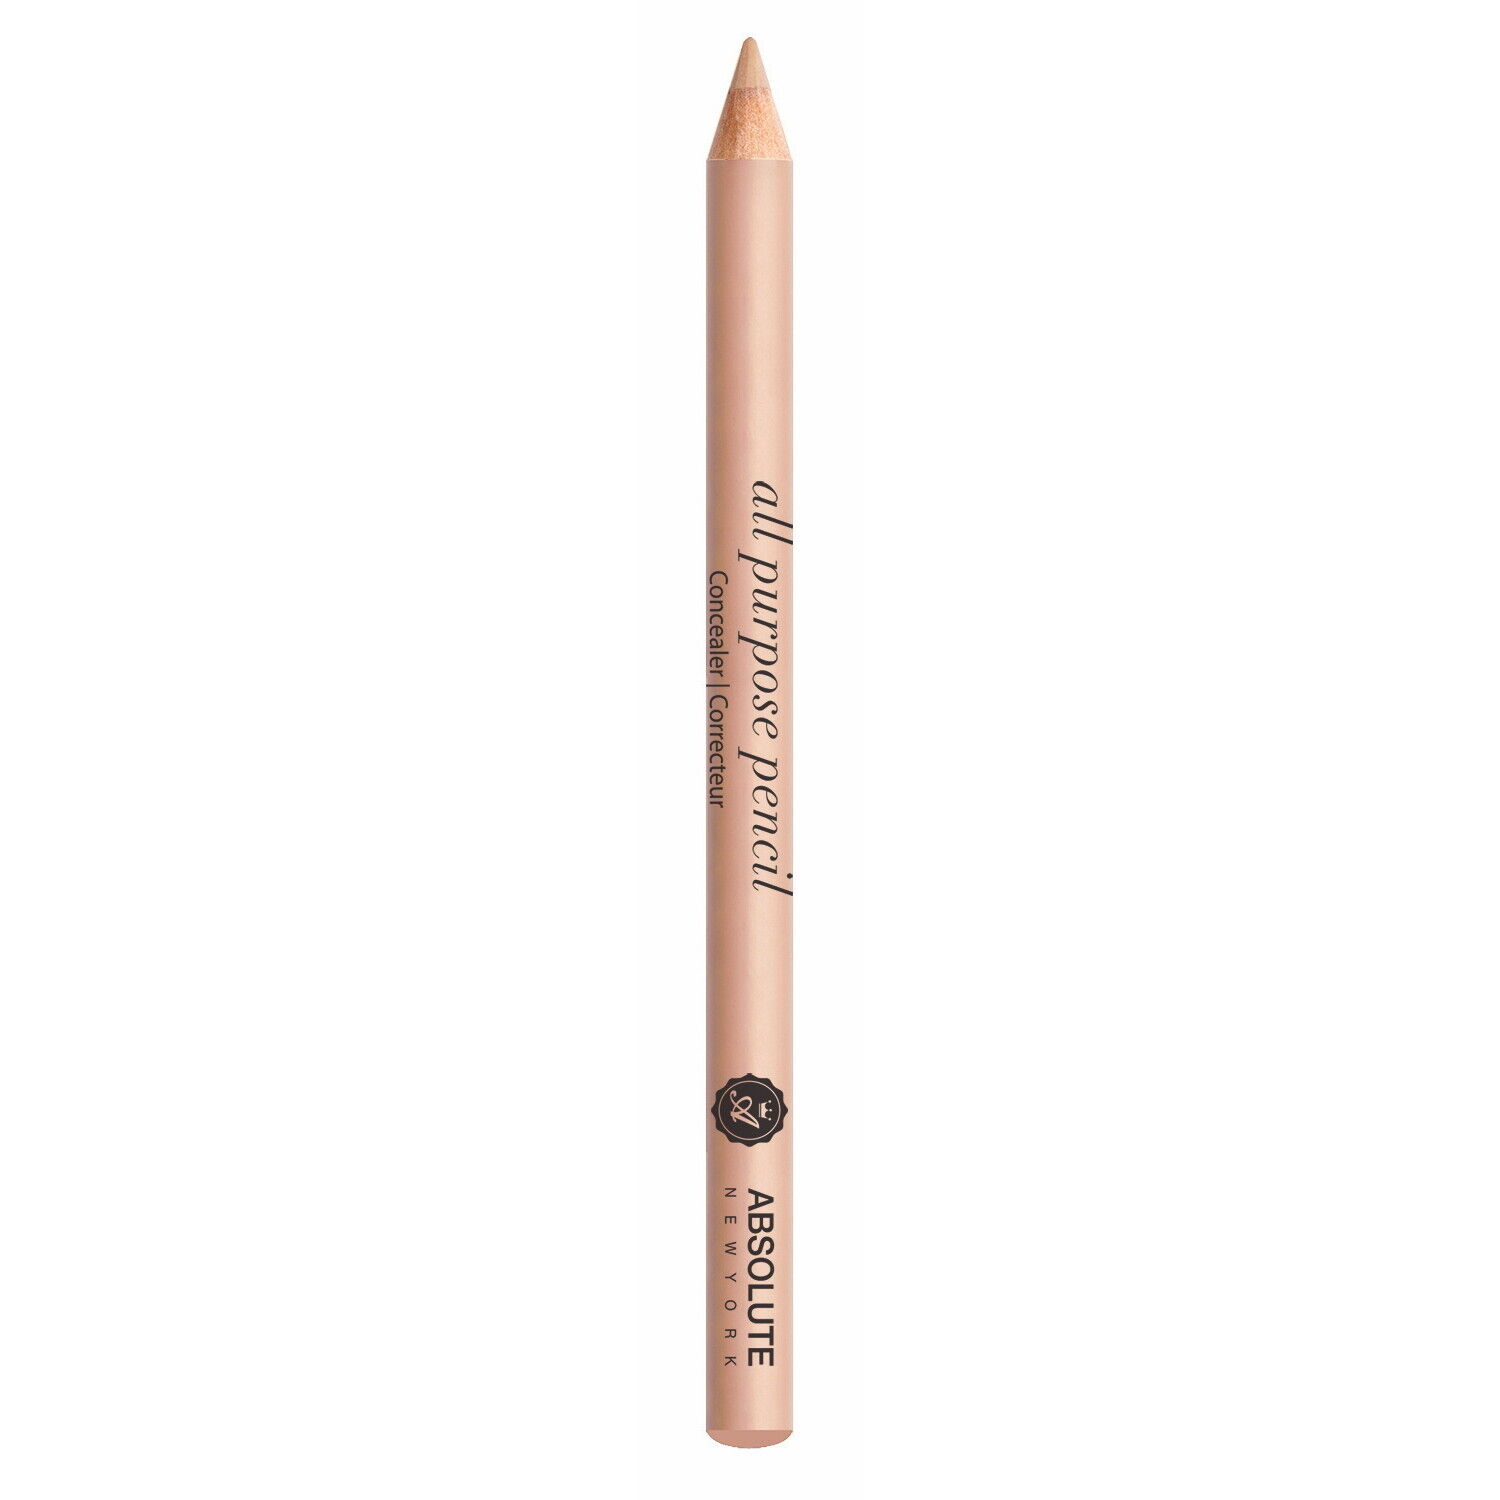 ABSOLUTE All Purpose Pencil Concealer - Light (6 Pack)